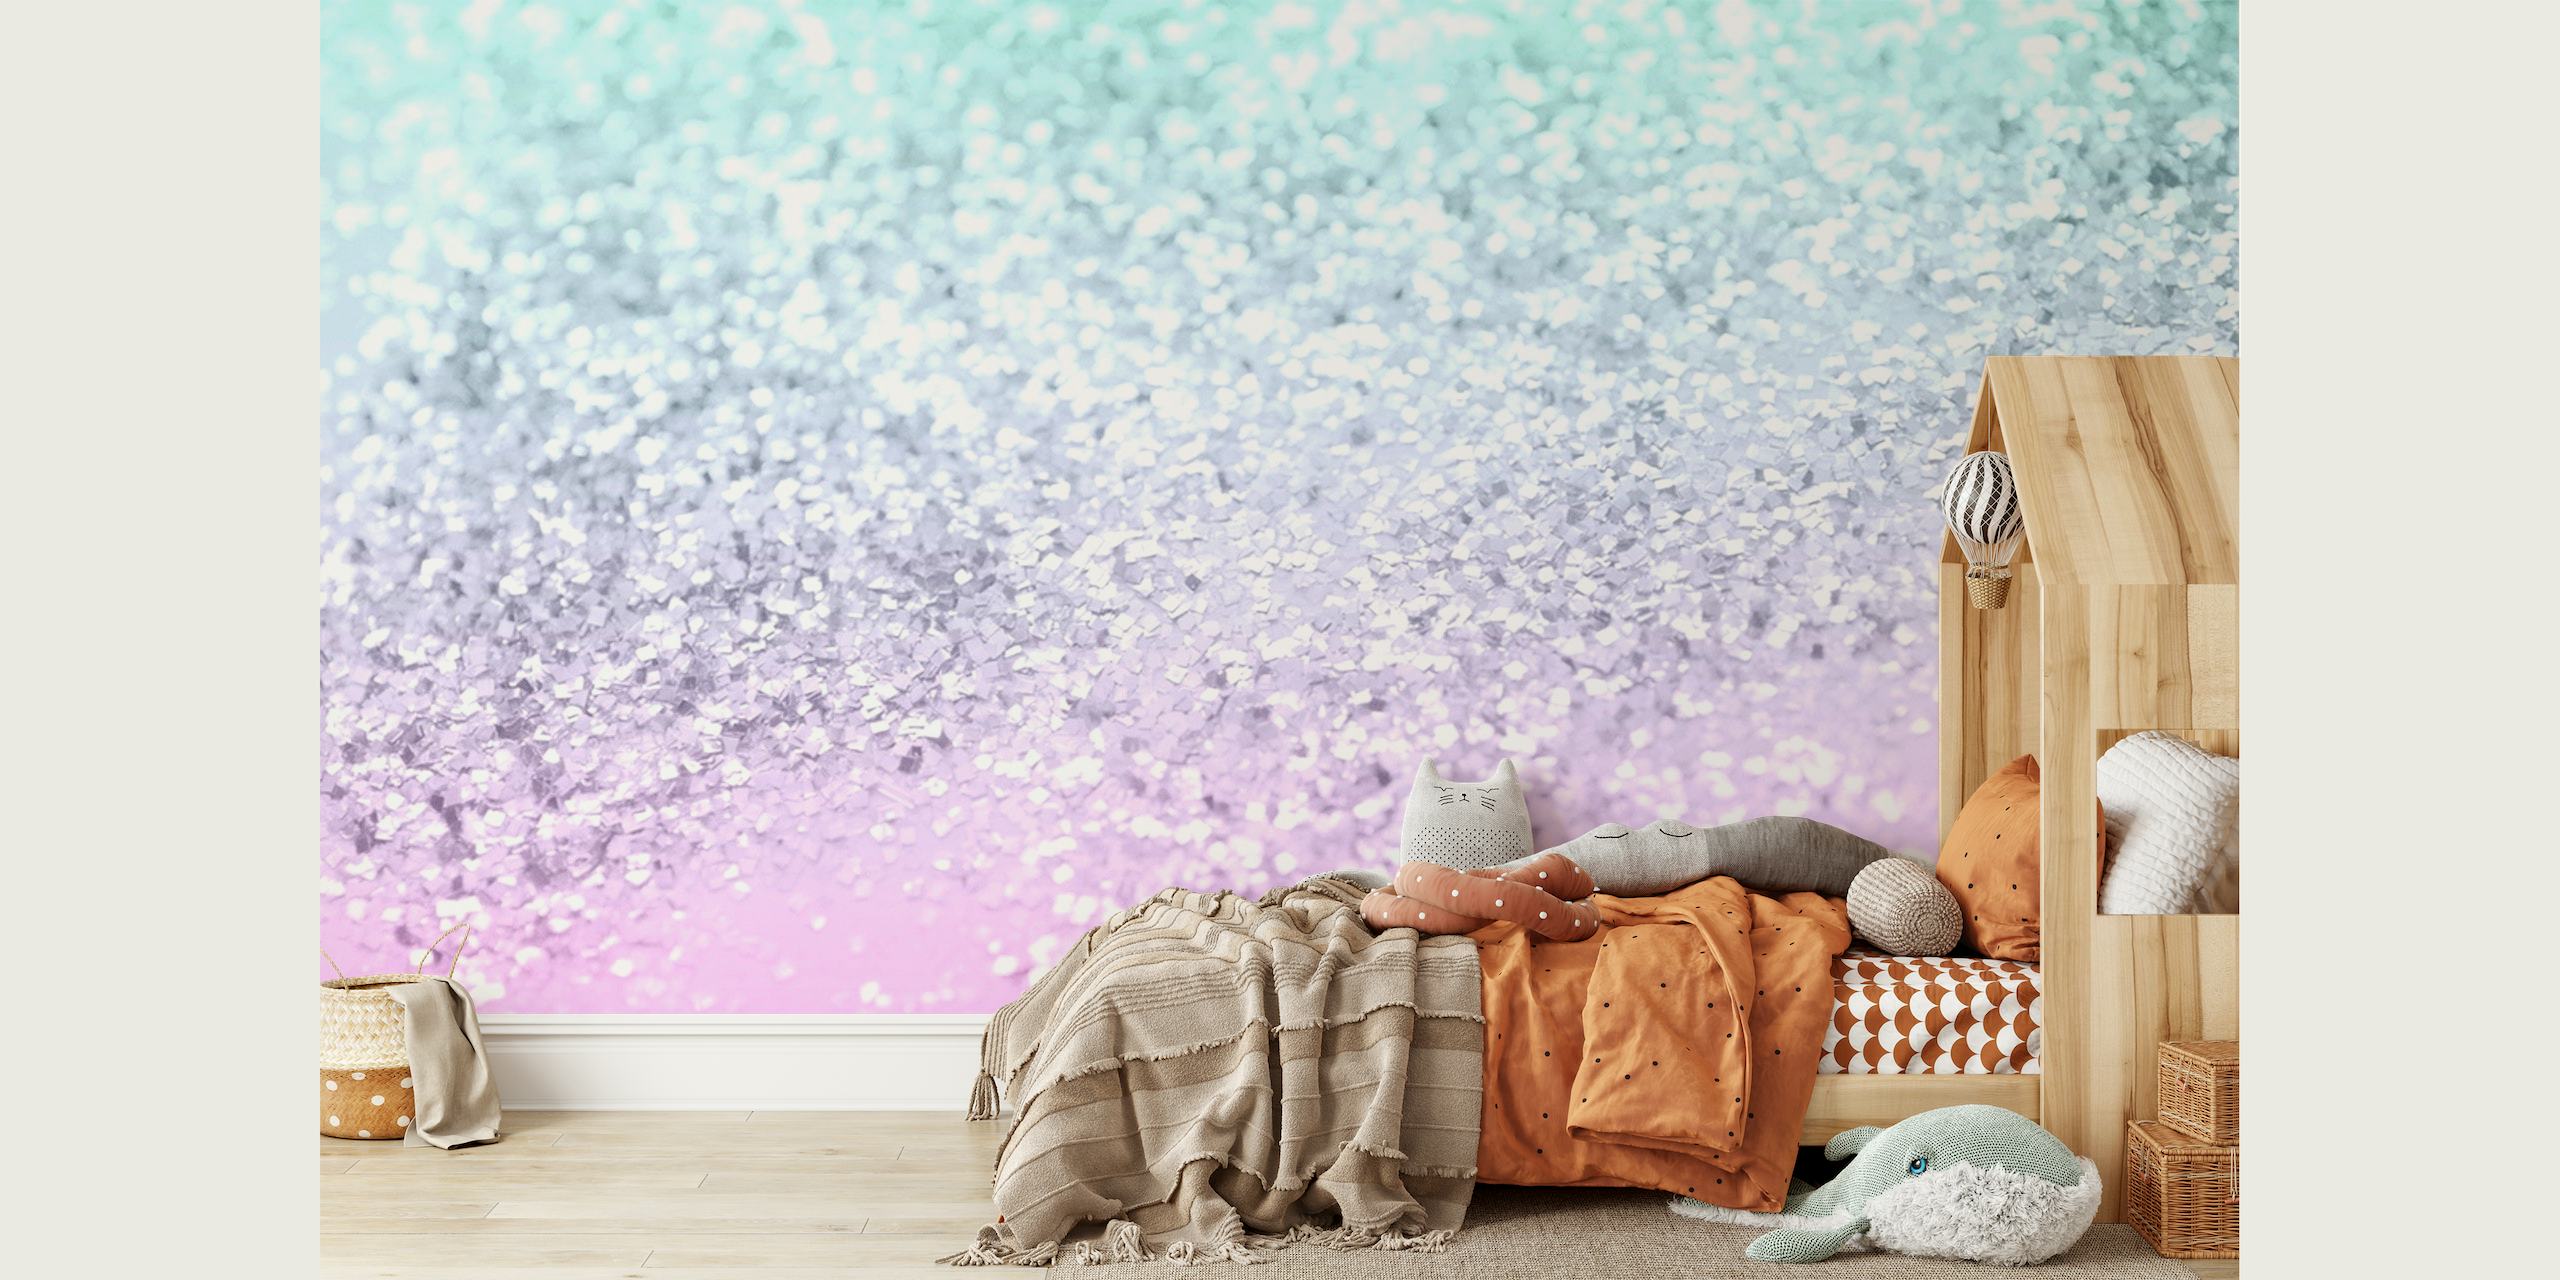 Pastel-colored gradient wall mural giving off a mermaid tail glittery vibe